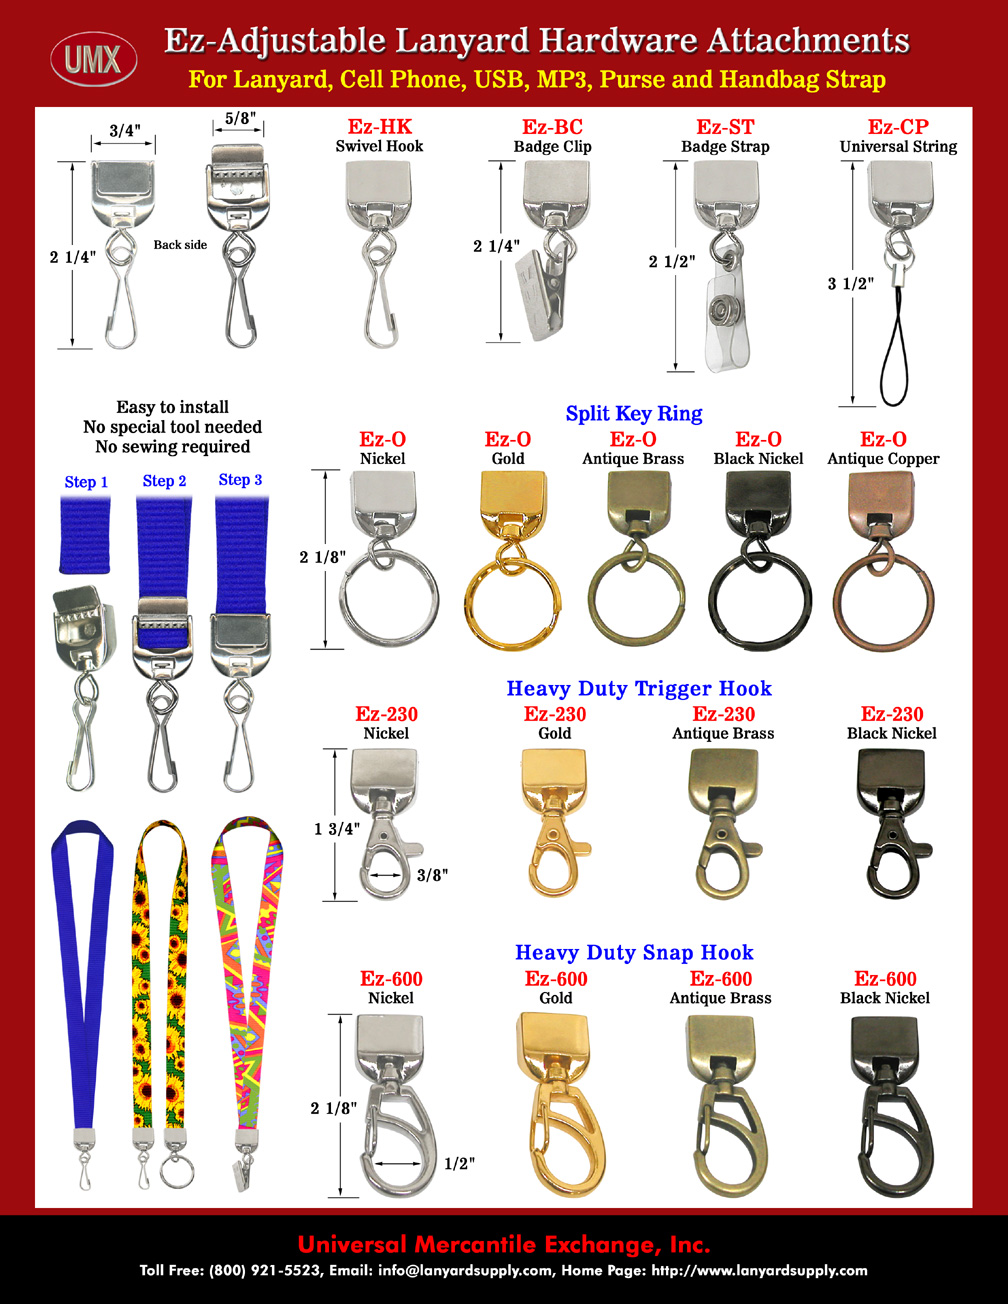 Easy Adjustable Lanyards and Cell Phone Straps Making Hardware: Ez-Adjustable Swivel Hooks, Badge Clips, Key Rings, Cell Phone Connectors and Snap Hooks